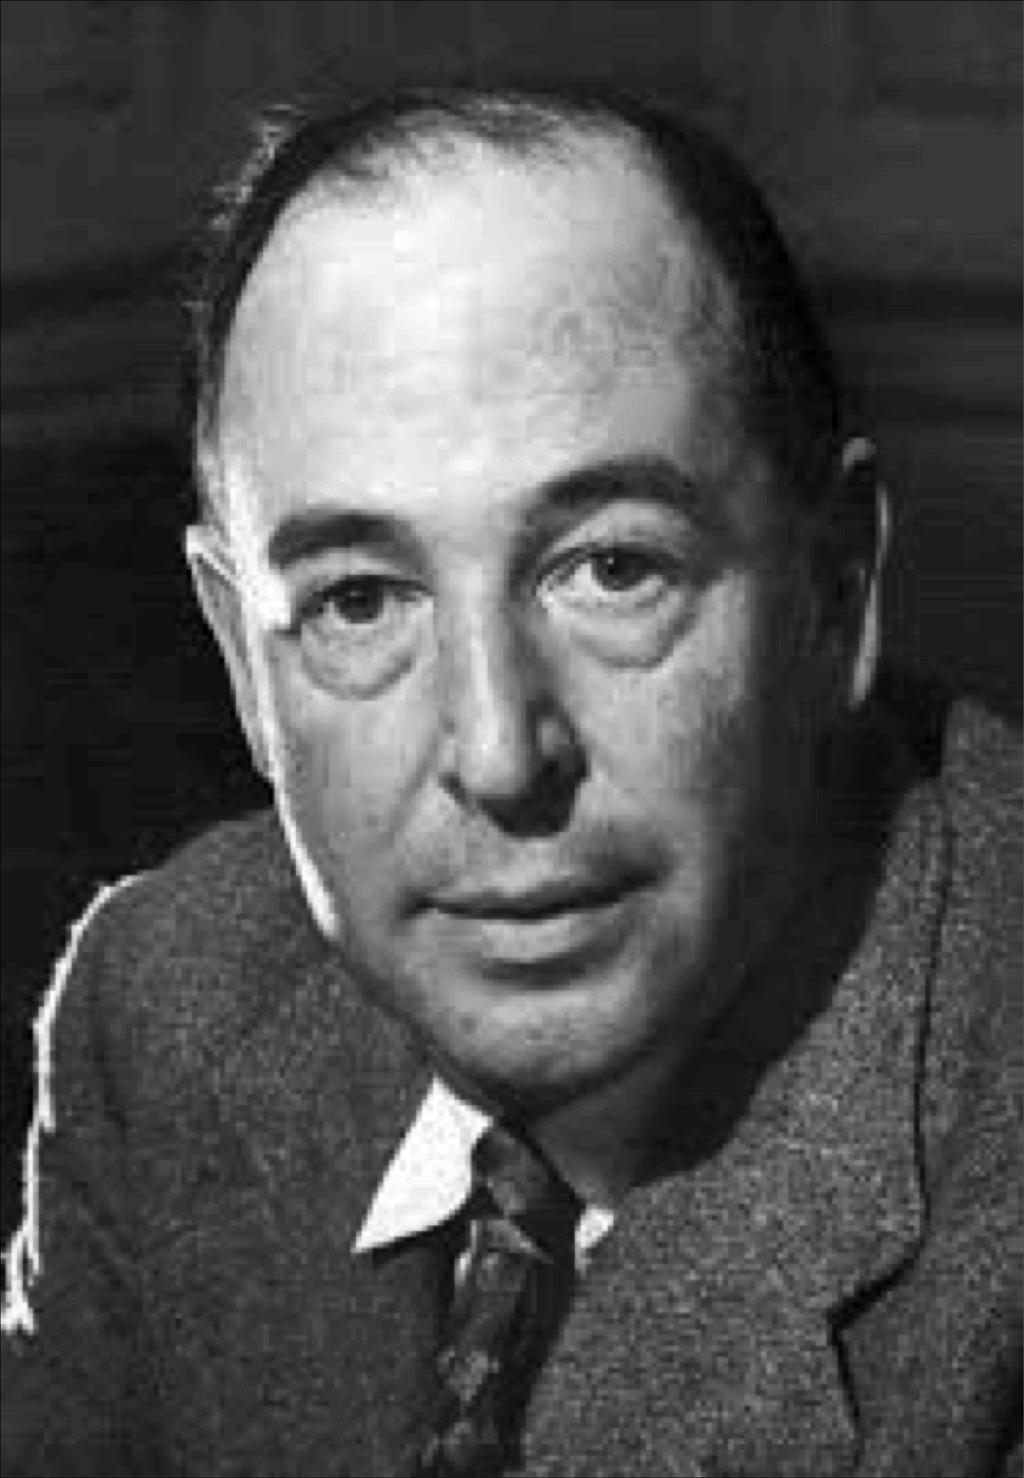 The Man Behind Narnia Born on November 29, 1898, in Belfast Ireland, C.S. Lewis went on to teach at Oxford University and became a renowned writer.